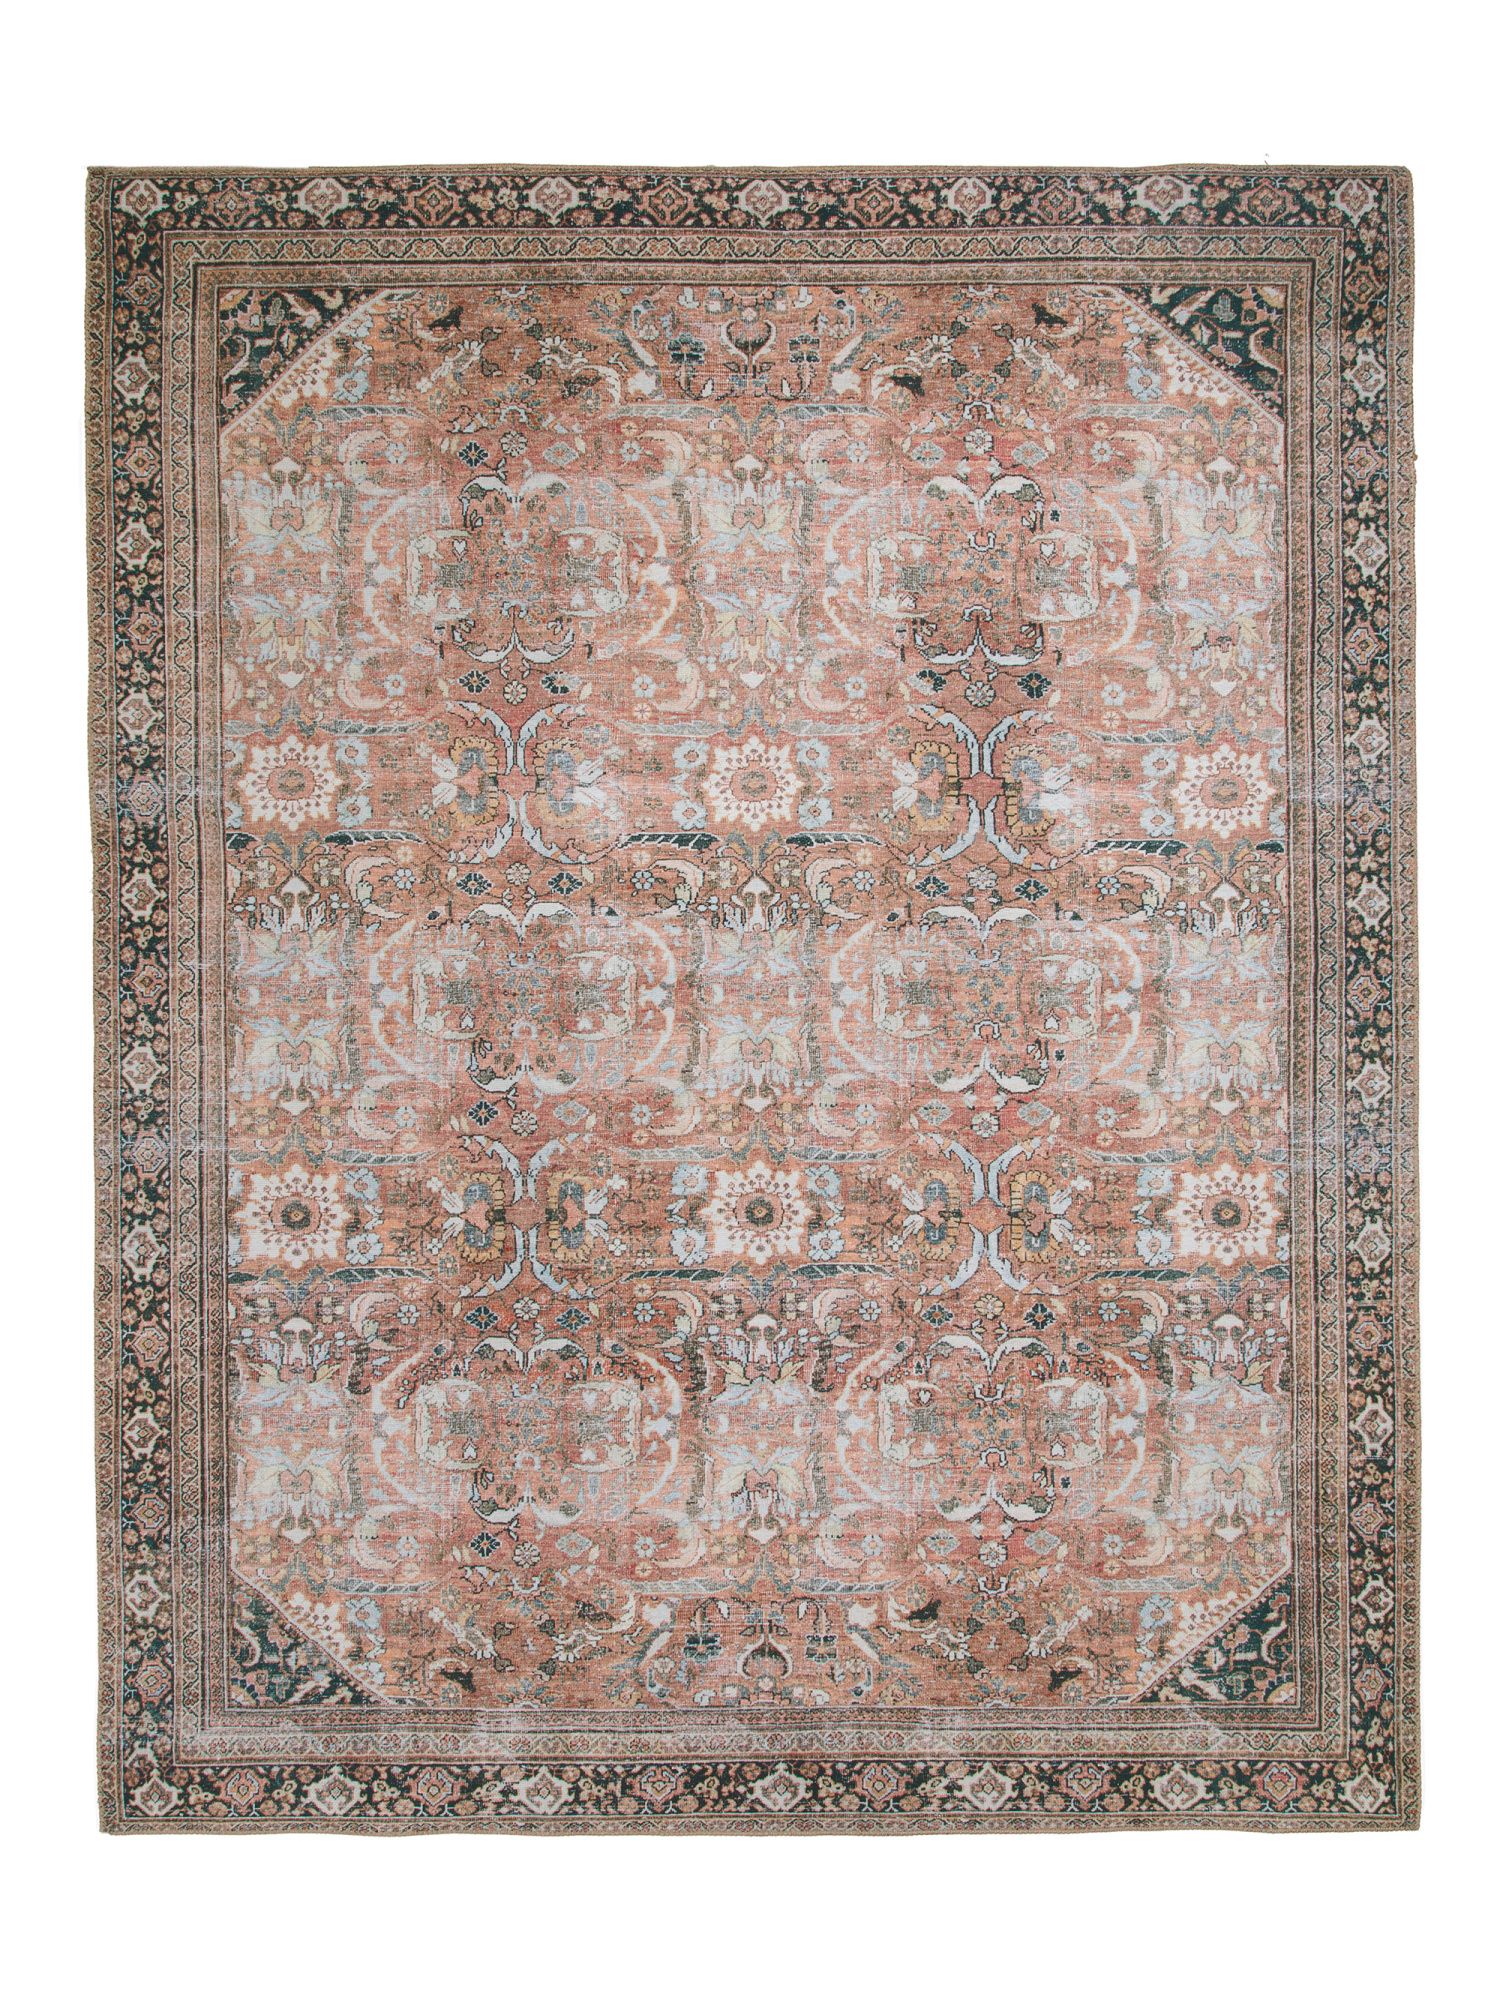 Made In Egypt Flat Weave Area Rug | TJ Maxx